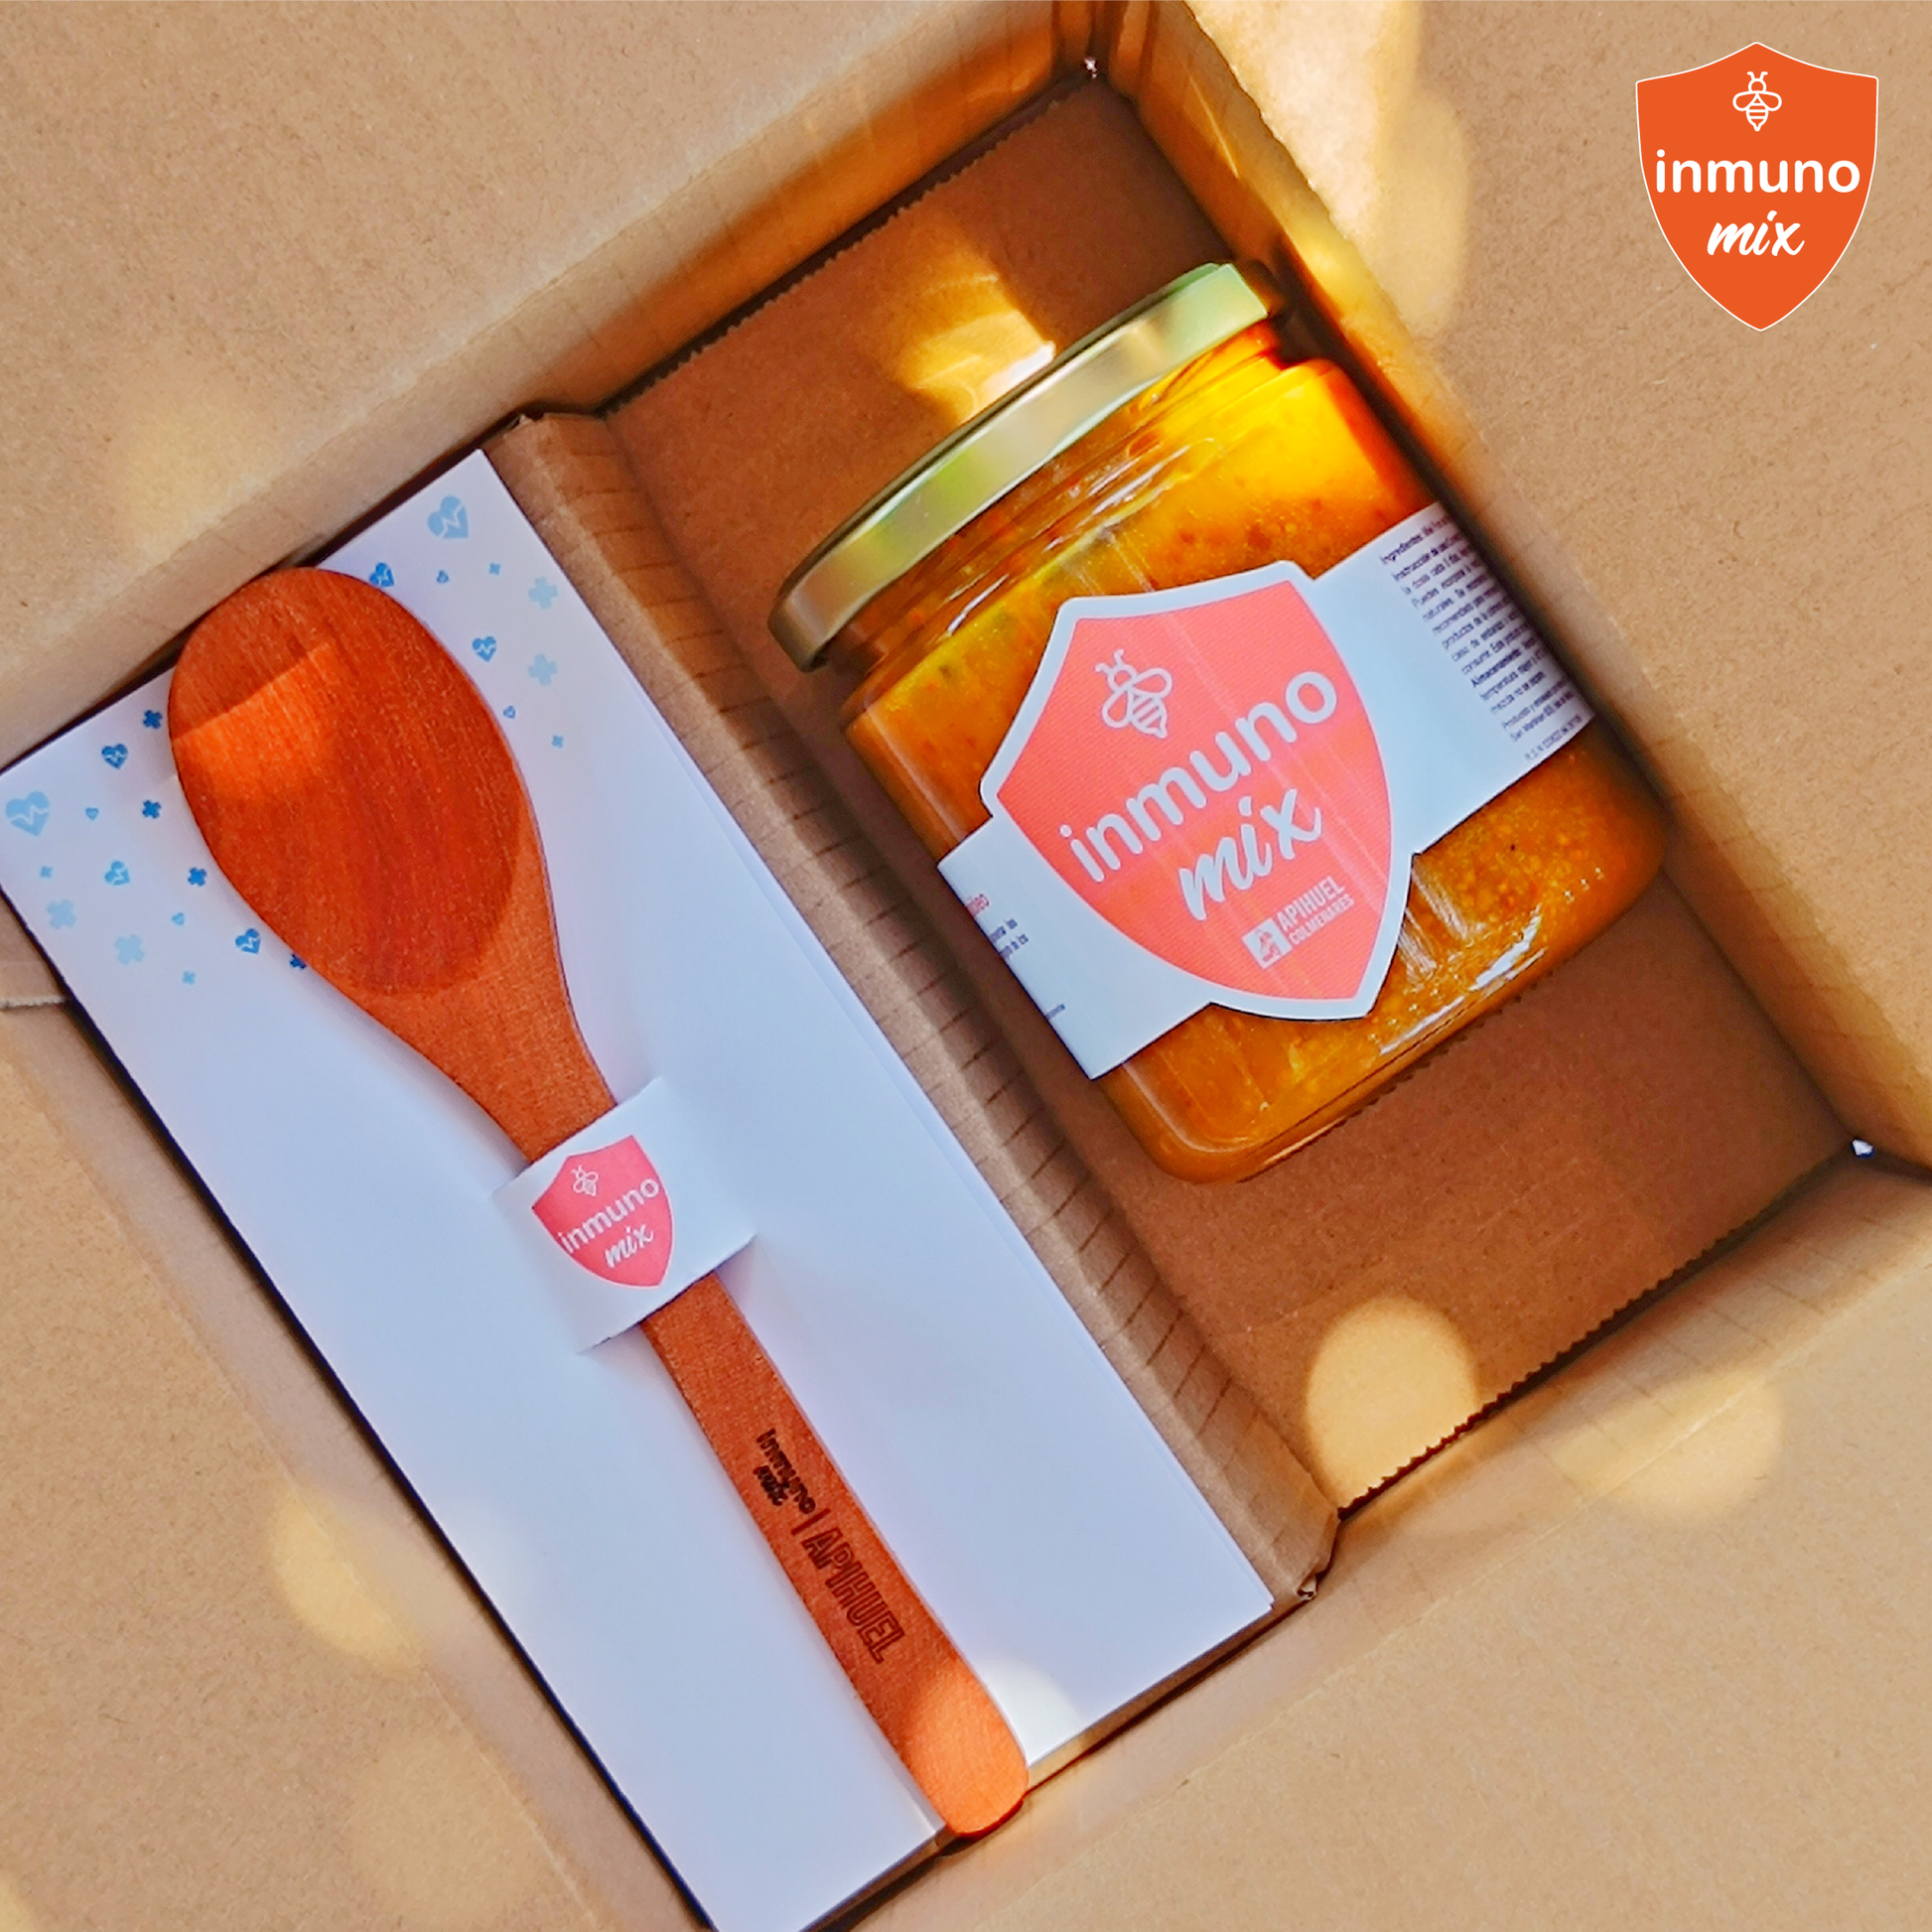 Inmuno Mix jar with orange jam, wooden spoon, and sauce in a box.